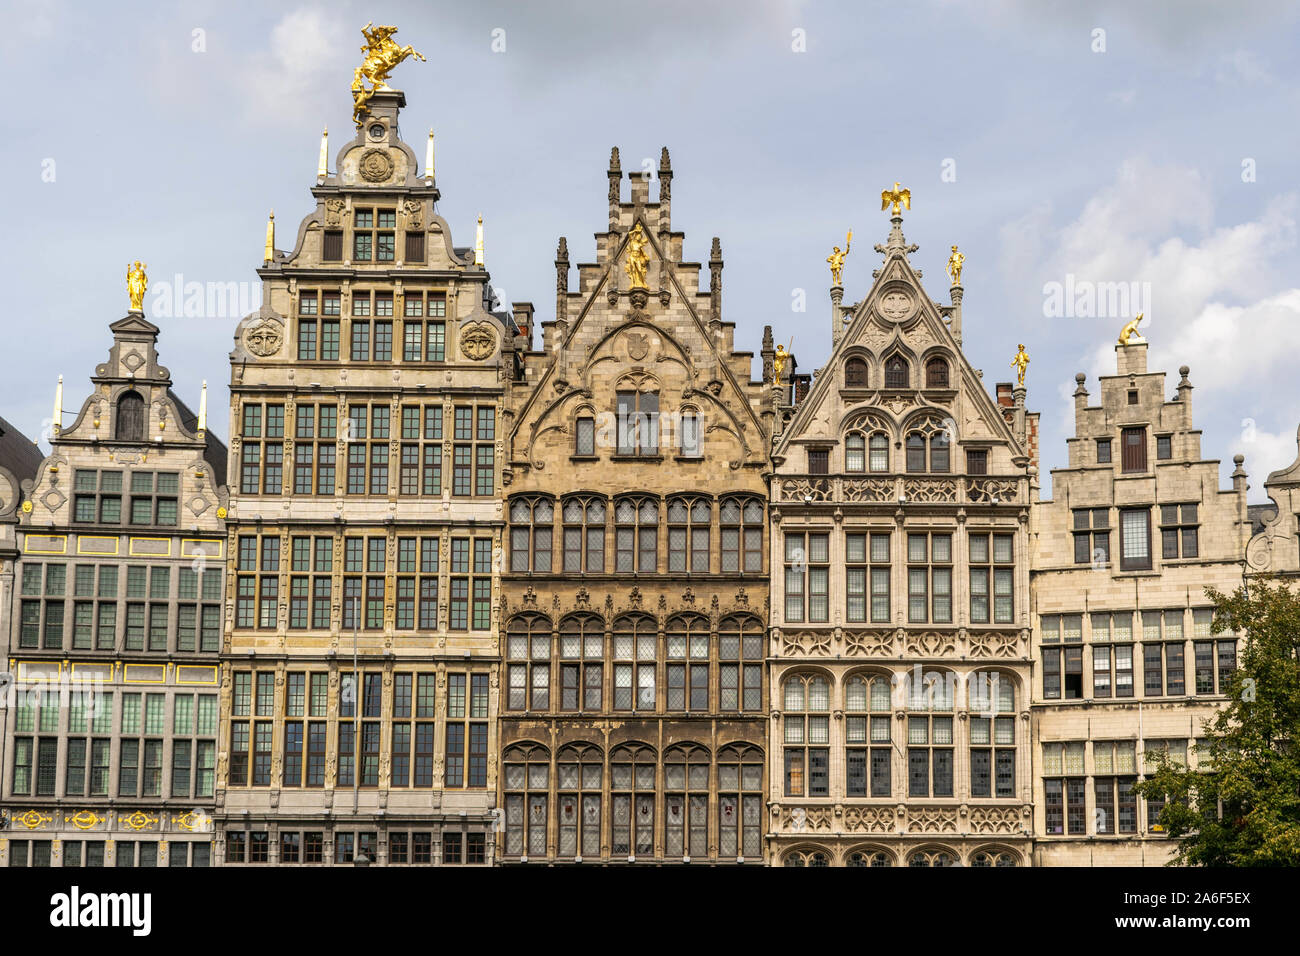 Antwerp, Belgium - 9th September 2019: Grote Markt, Antwerpen, town square with city hall, elaborate 16th century guildhalls. Postcard background Stock Photo